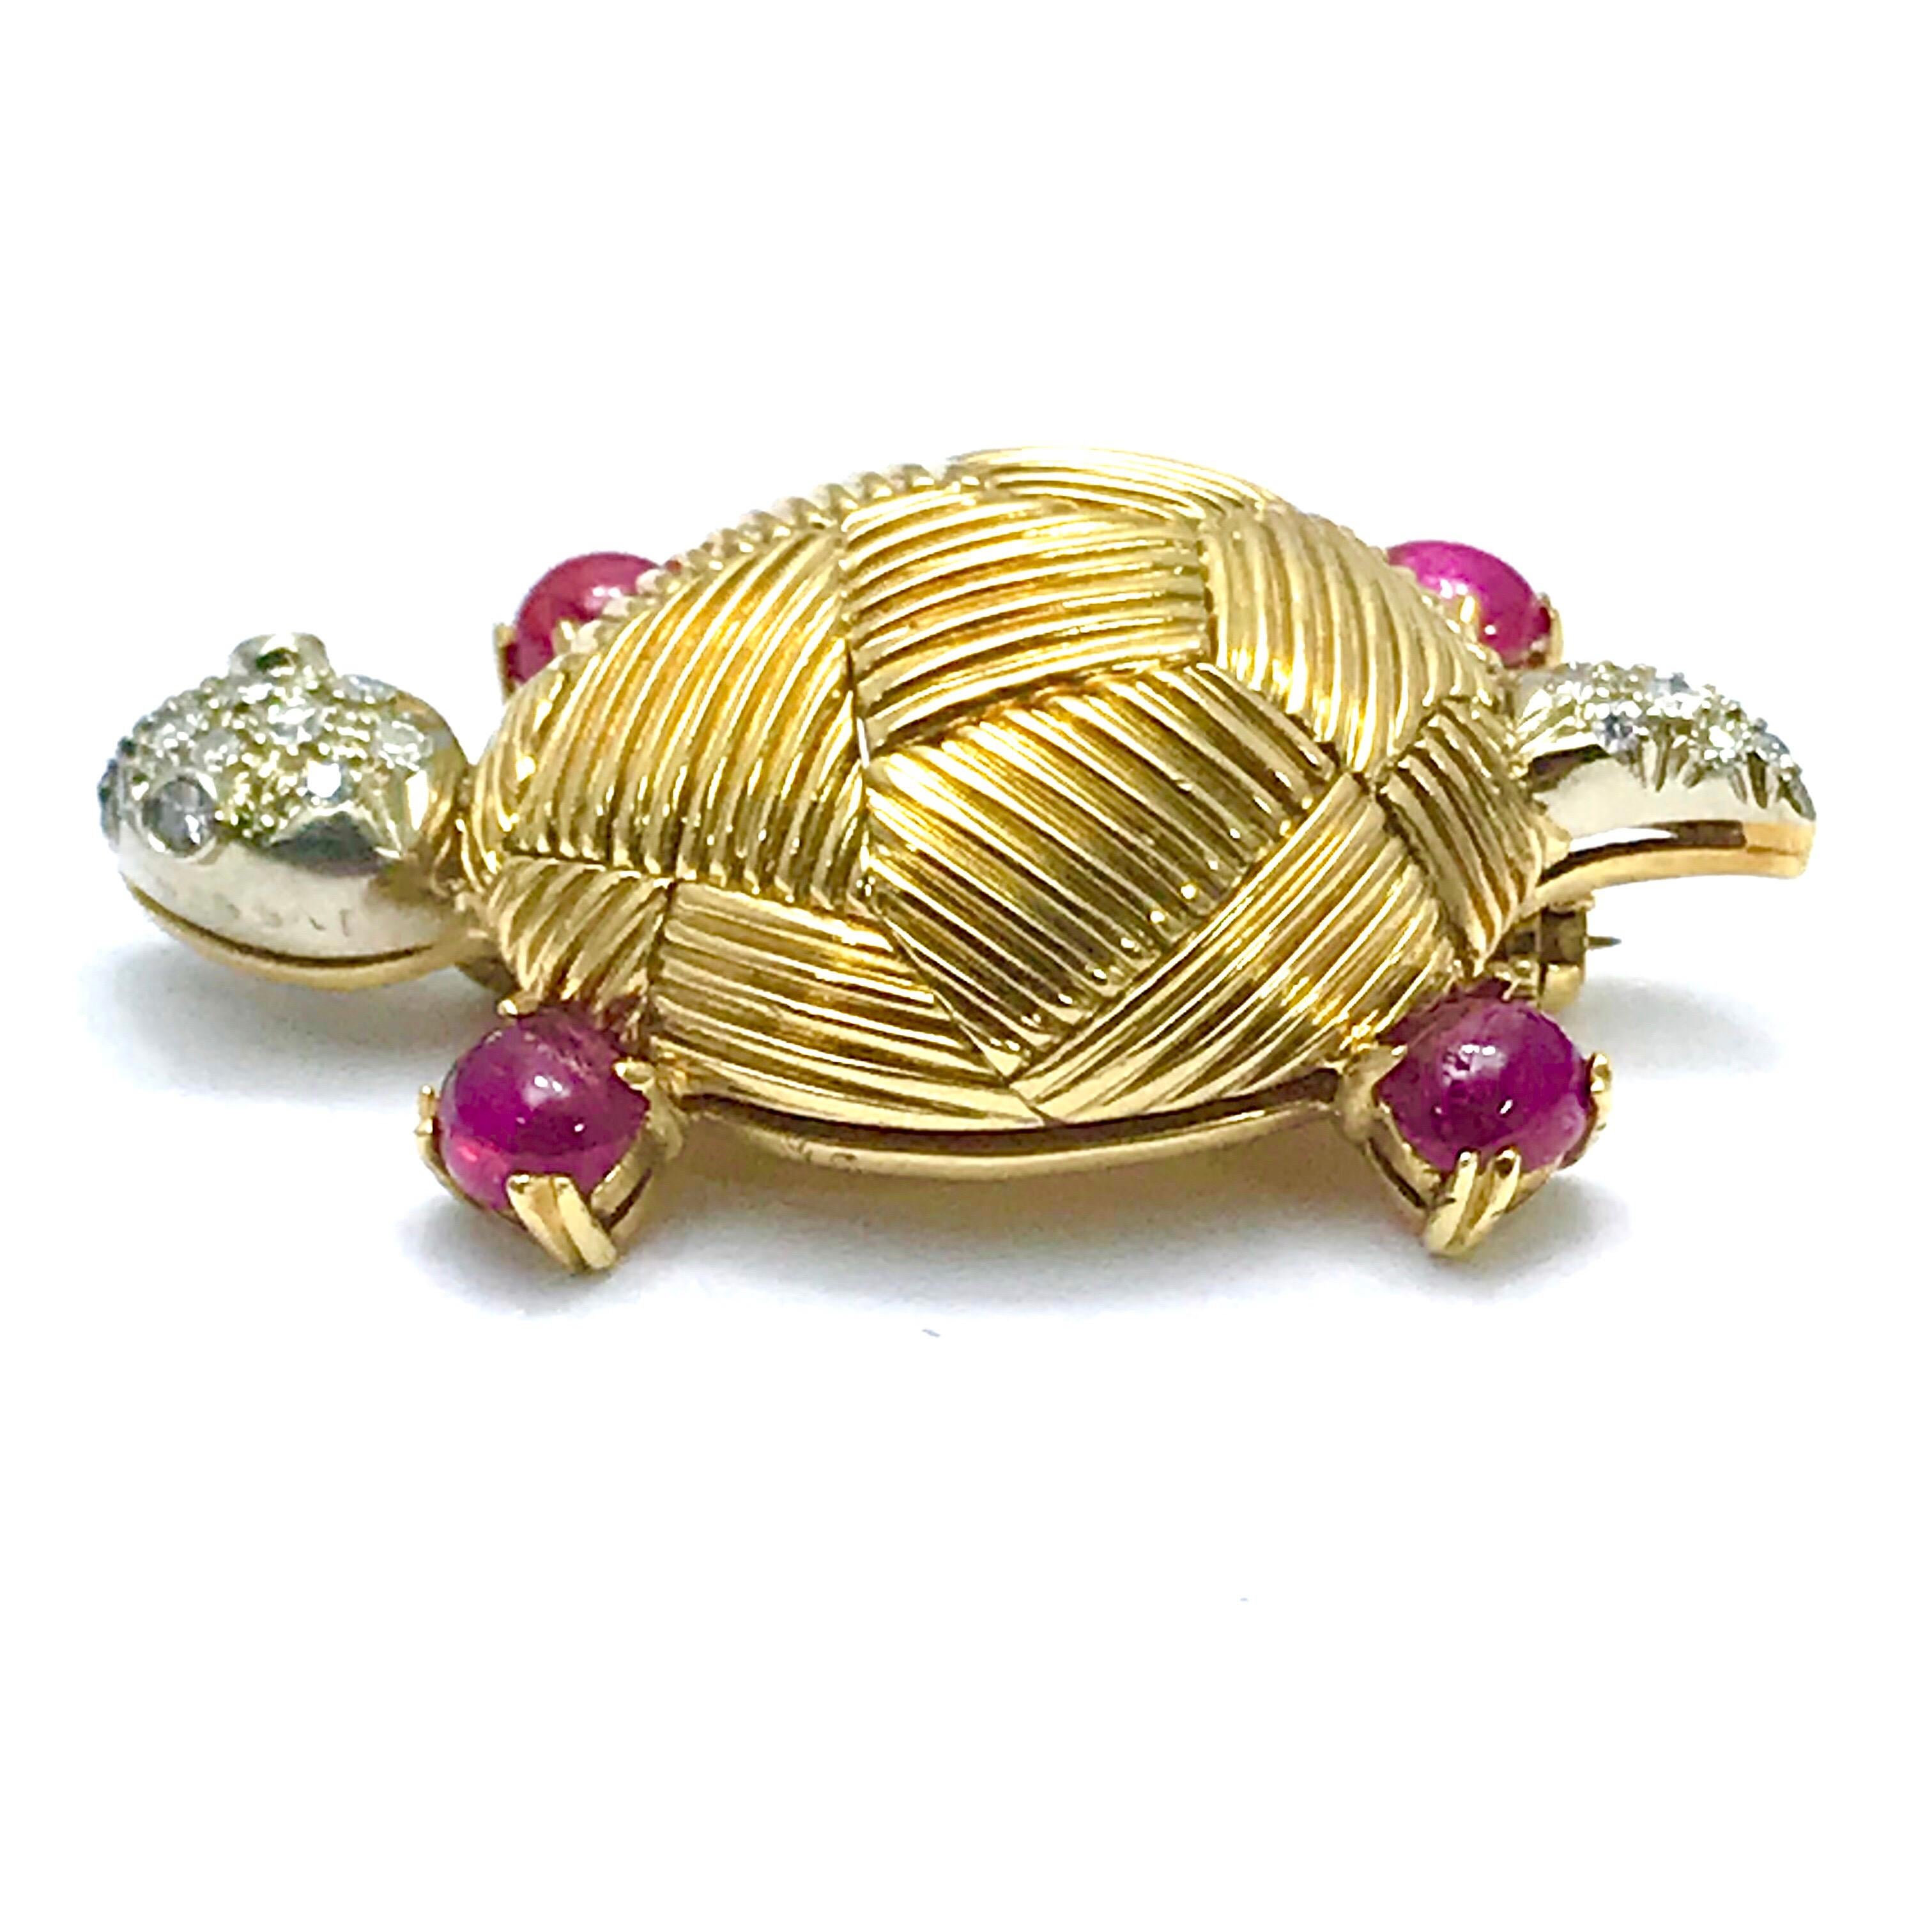 This is an iconic Van Cleef & Arpels cabochon ruby and Diamond 18 karat yellow gold turtle brooch.  Hand crafted with a textured shell, Ruby legs, and Diamond head and tail, it is a true work of art.  The four cabochon Rubies have a total weight of